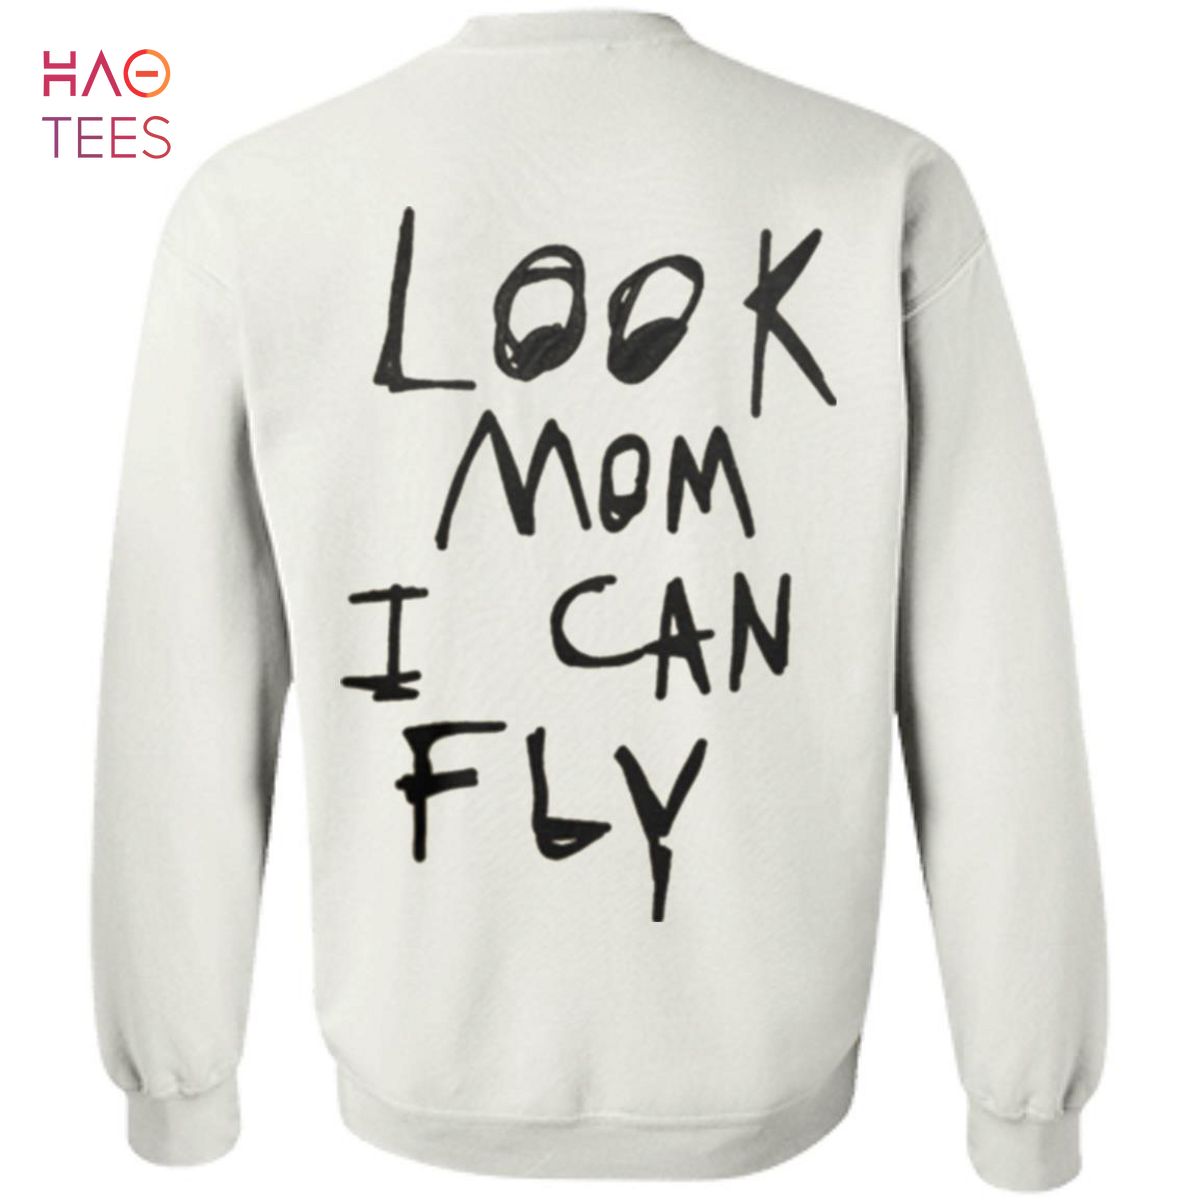 [NEW] Look Mom I Can Fly Sweater